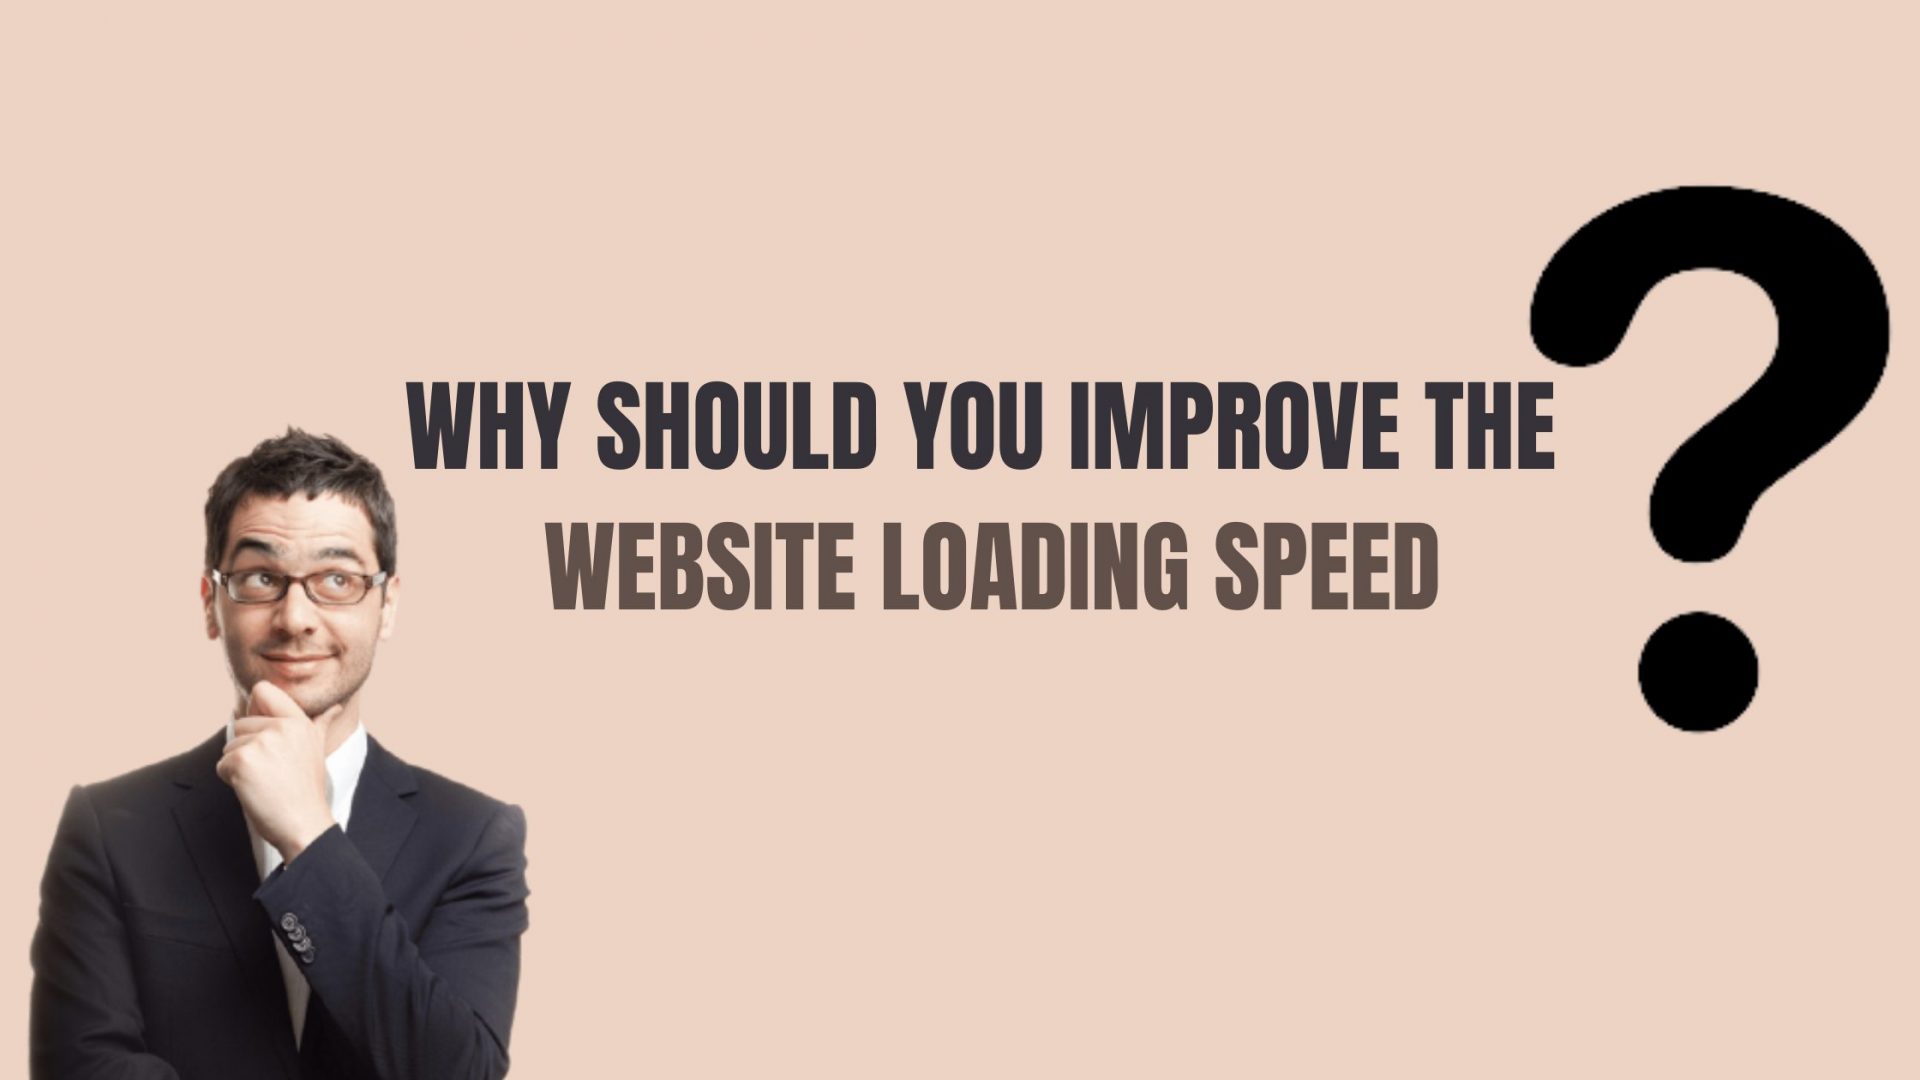 Why should you improve the website loading speed